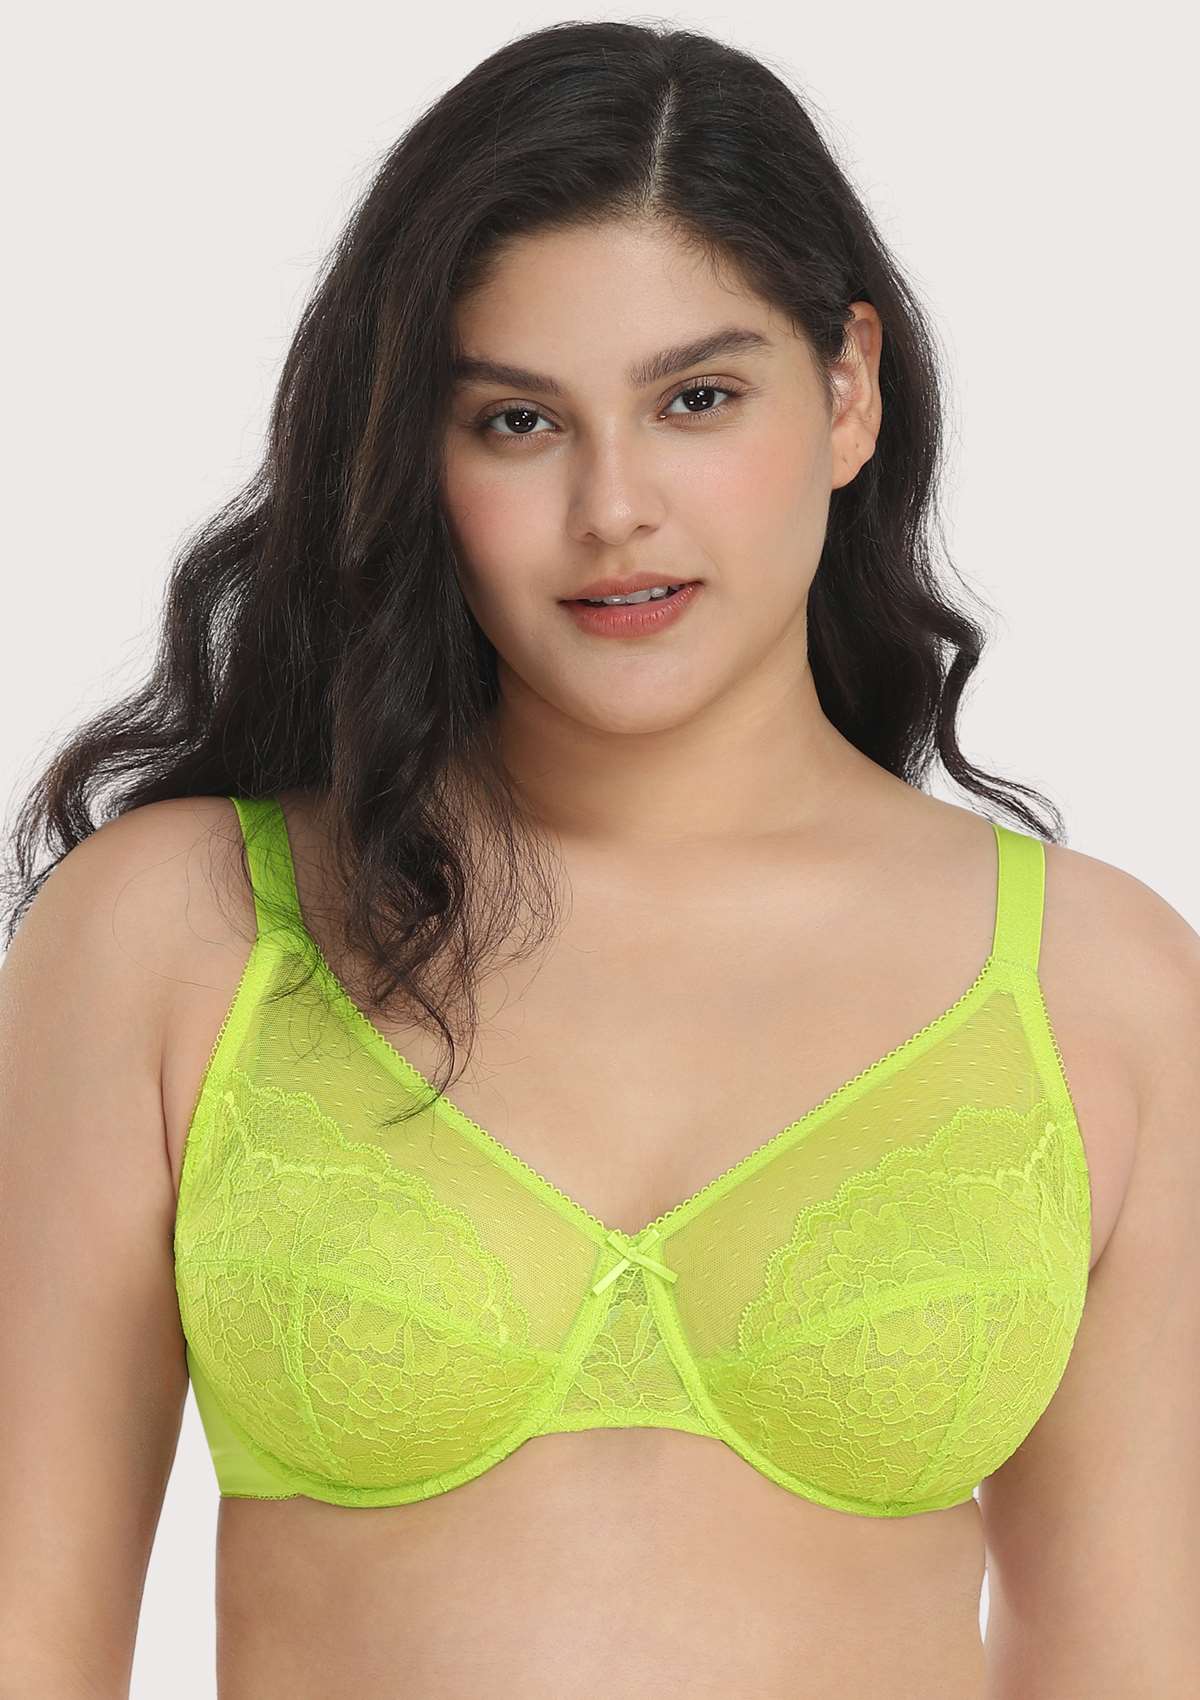 HSIA Enchante Full Cup Minimizing Bra: Supportive Unlined Lace Bra - Lime Green / 40 / D